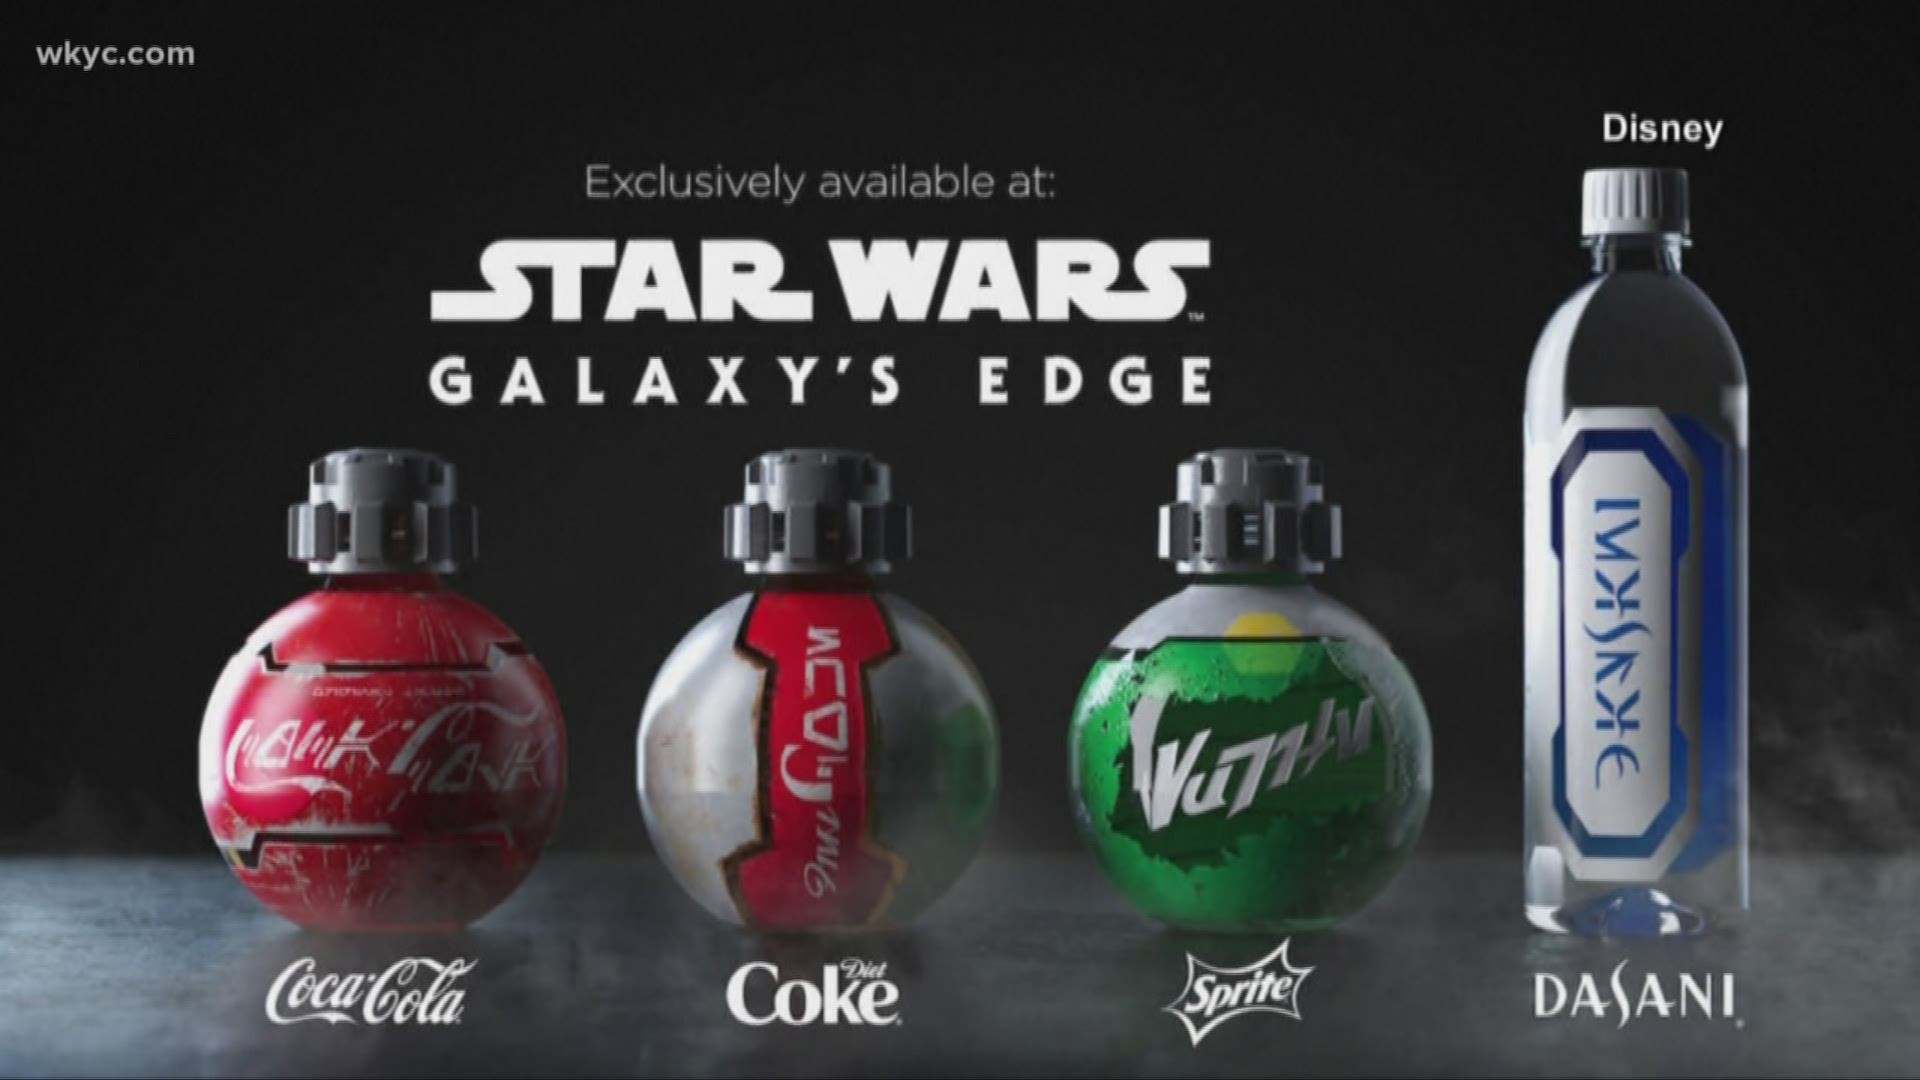 The bottles are meant to resemble thermal detonators used in the films. Many fans say they were buying them to display at home or turn into Christmas ornaments.